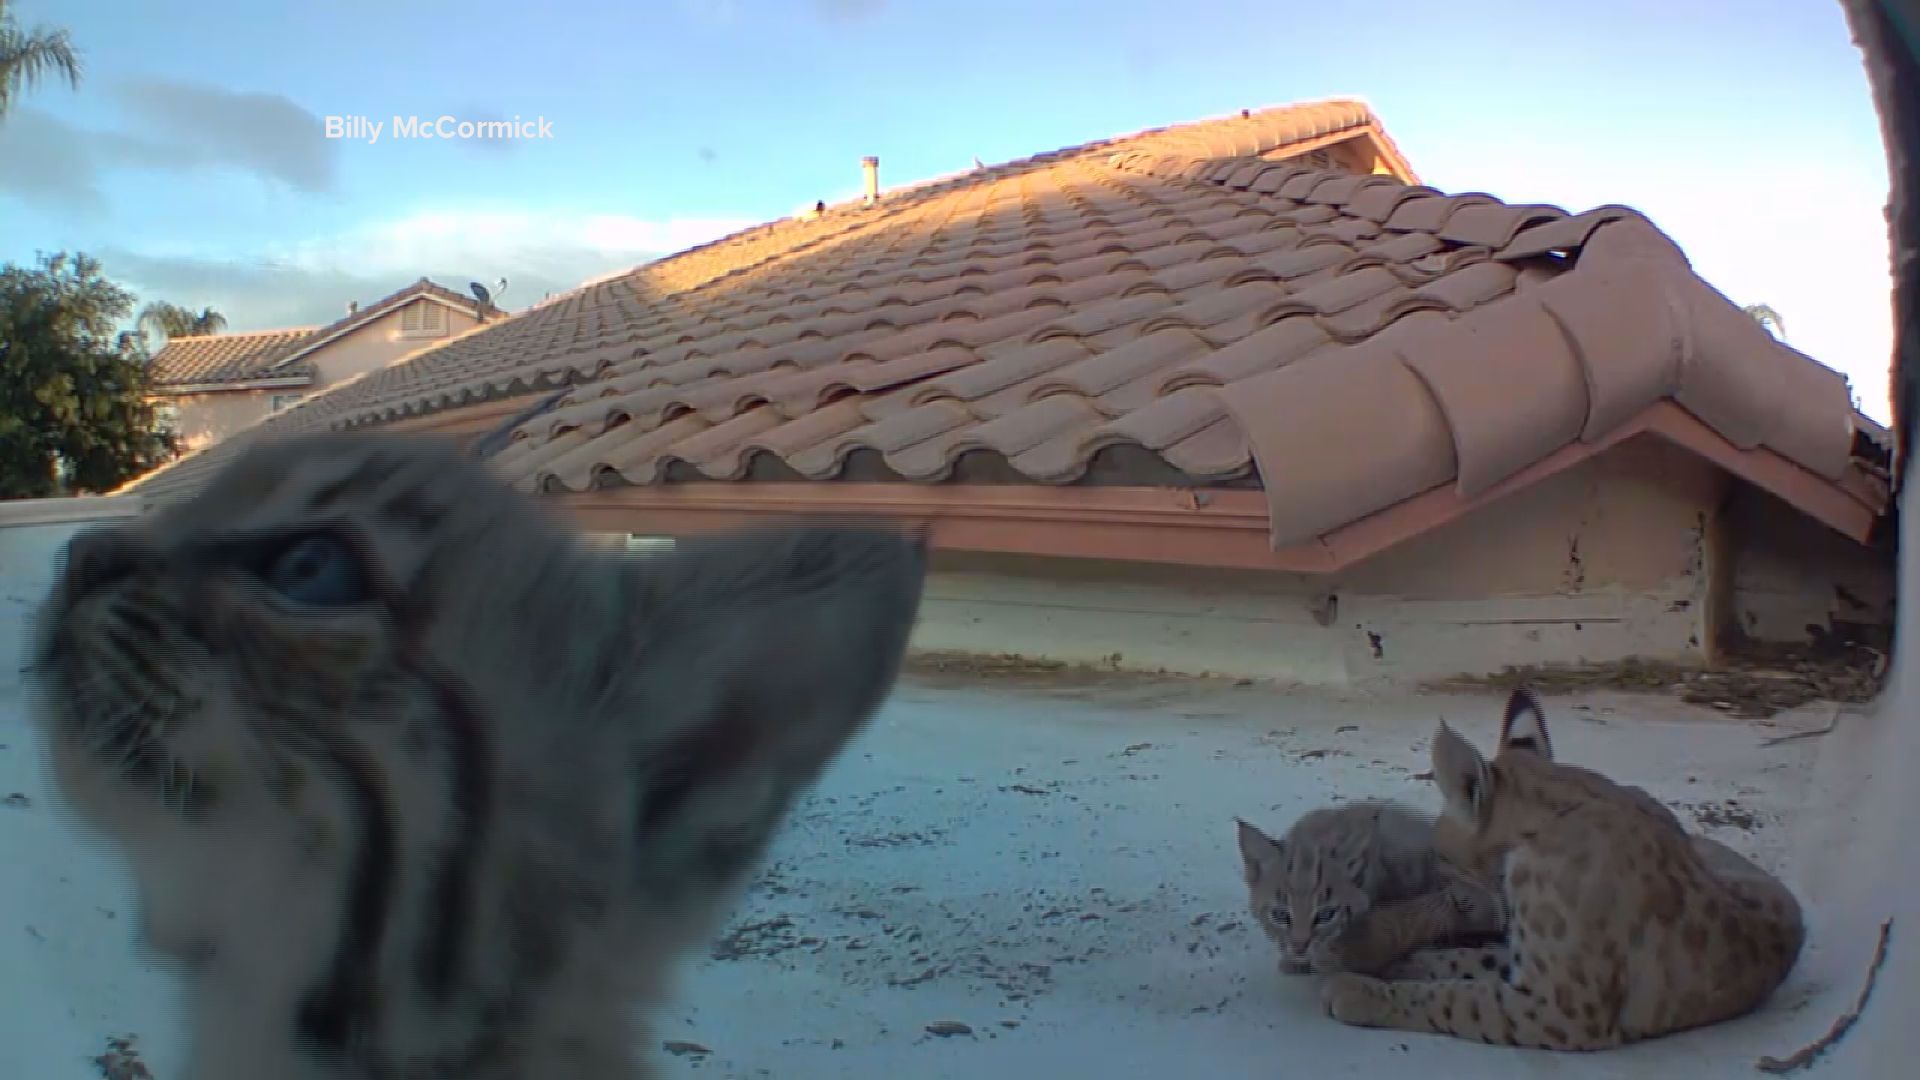 Billy McCormick says every year a bobcat gives birth on his roof in Tucson, AZ. This year he set up a camera and caught the kittens having a little fun while mom looked on.